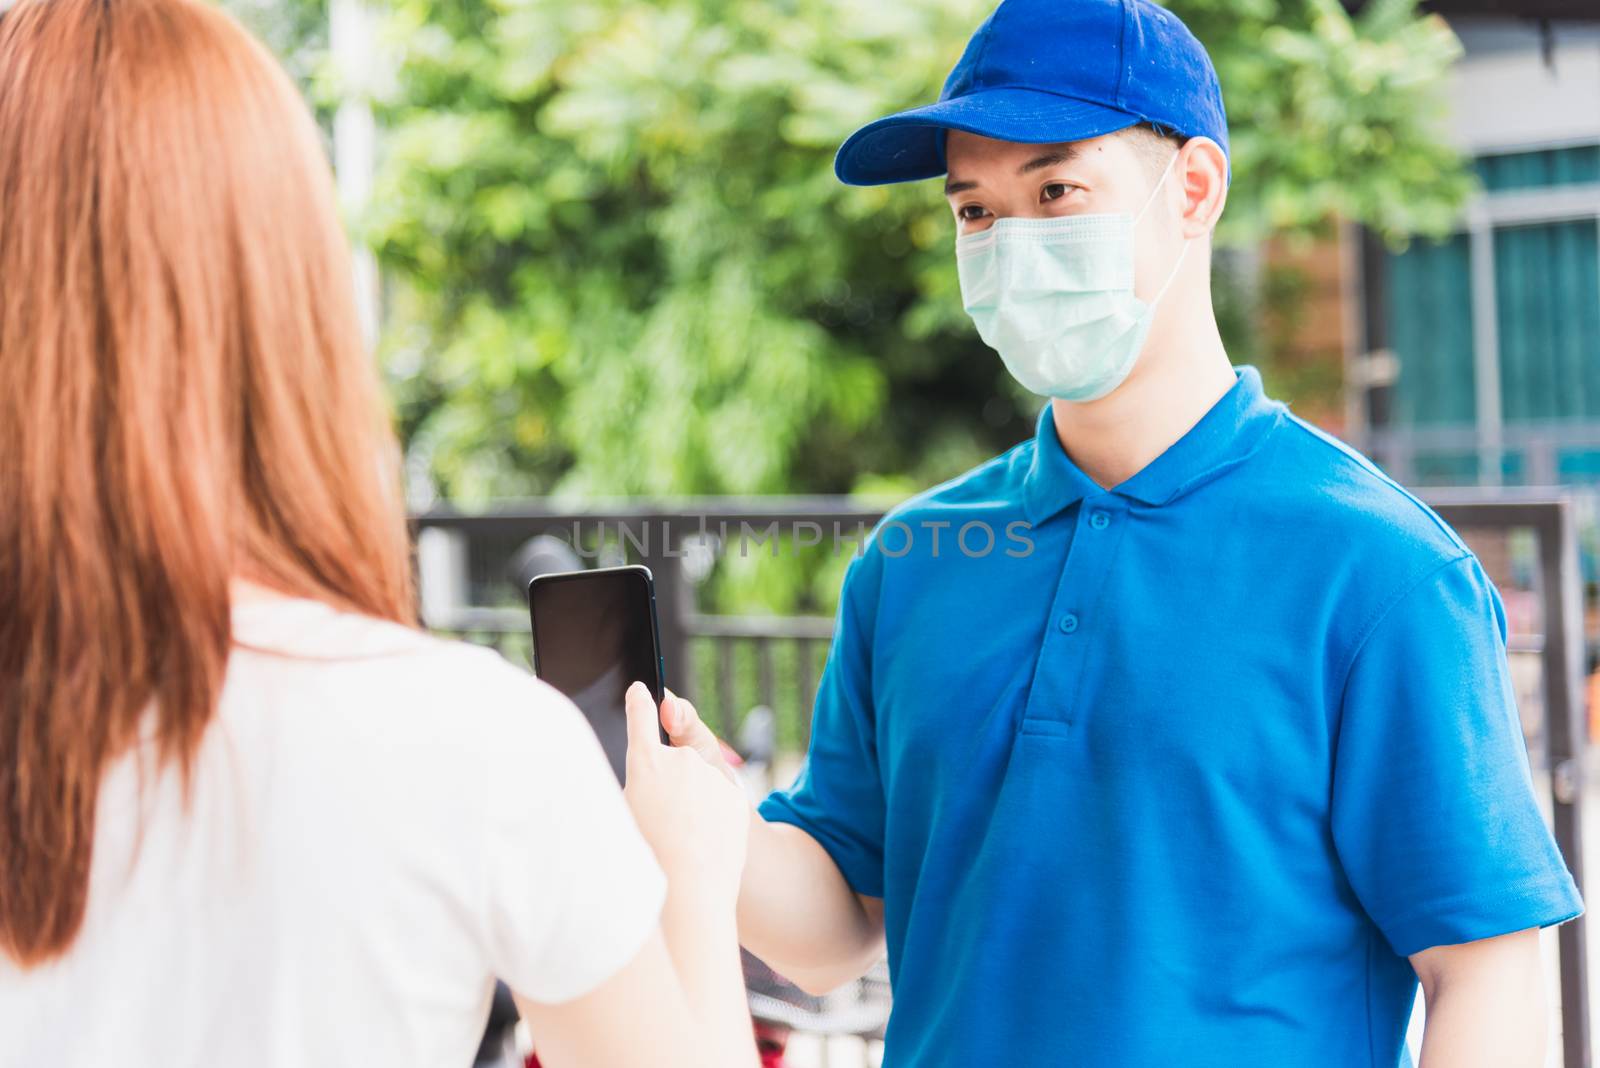 Asian delivery express courier young man giving parcel boxes to woman customer signature for receiving on mobile phone both protective face mask, under curfew quarantine pandemic coronavirus COVID-19